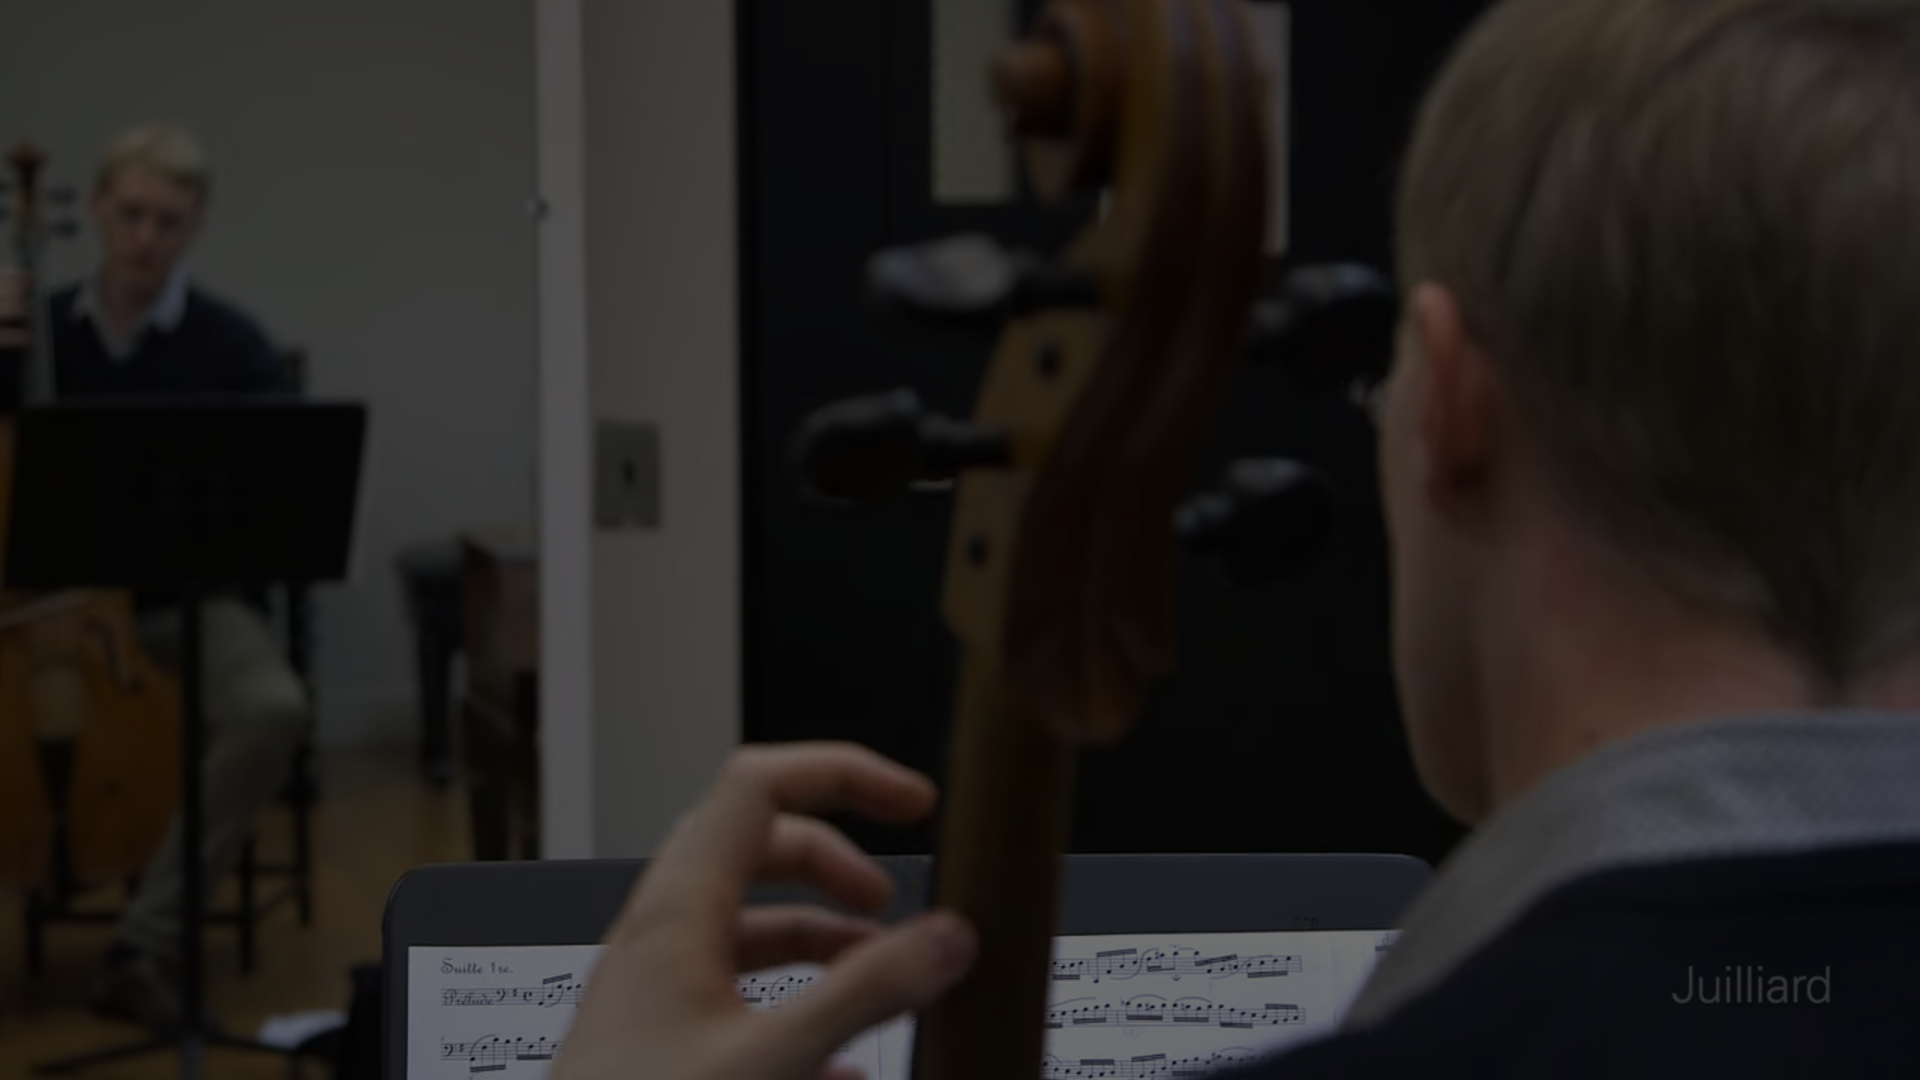 Video feature on a day in the life of Juilliard Historical Performance student Alexander Nicholls